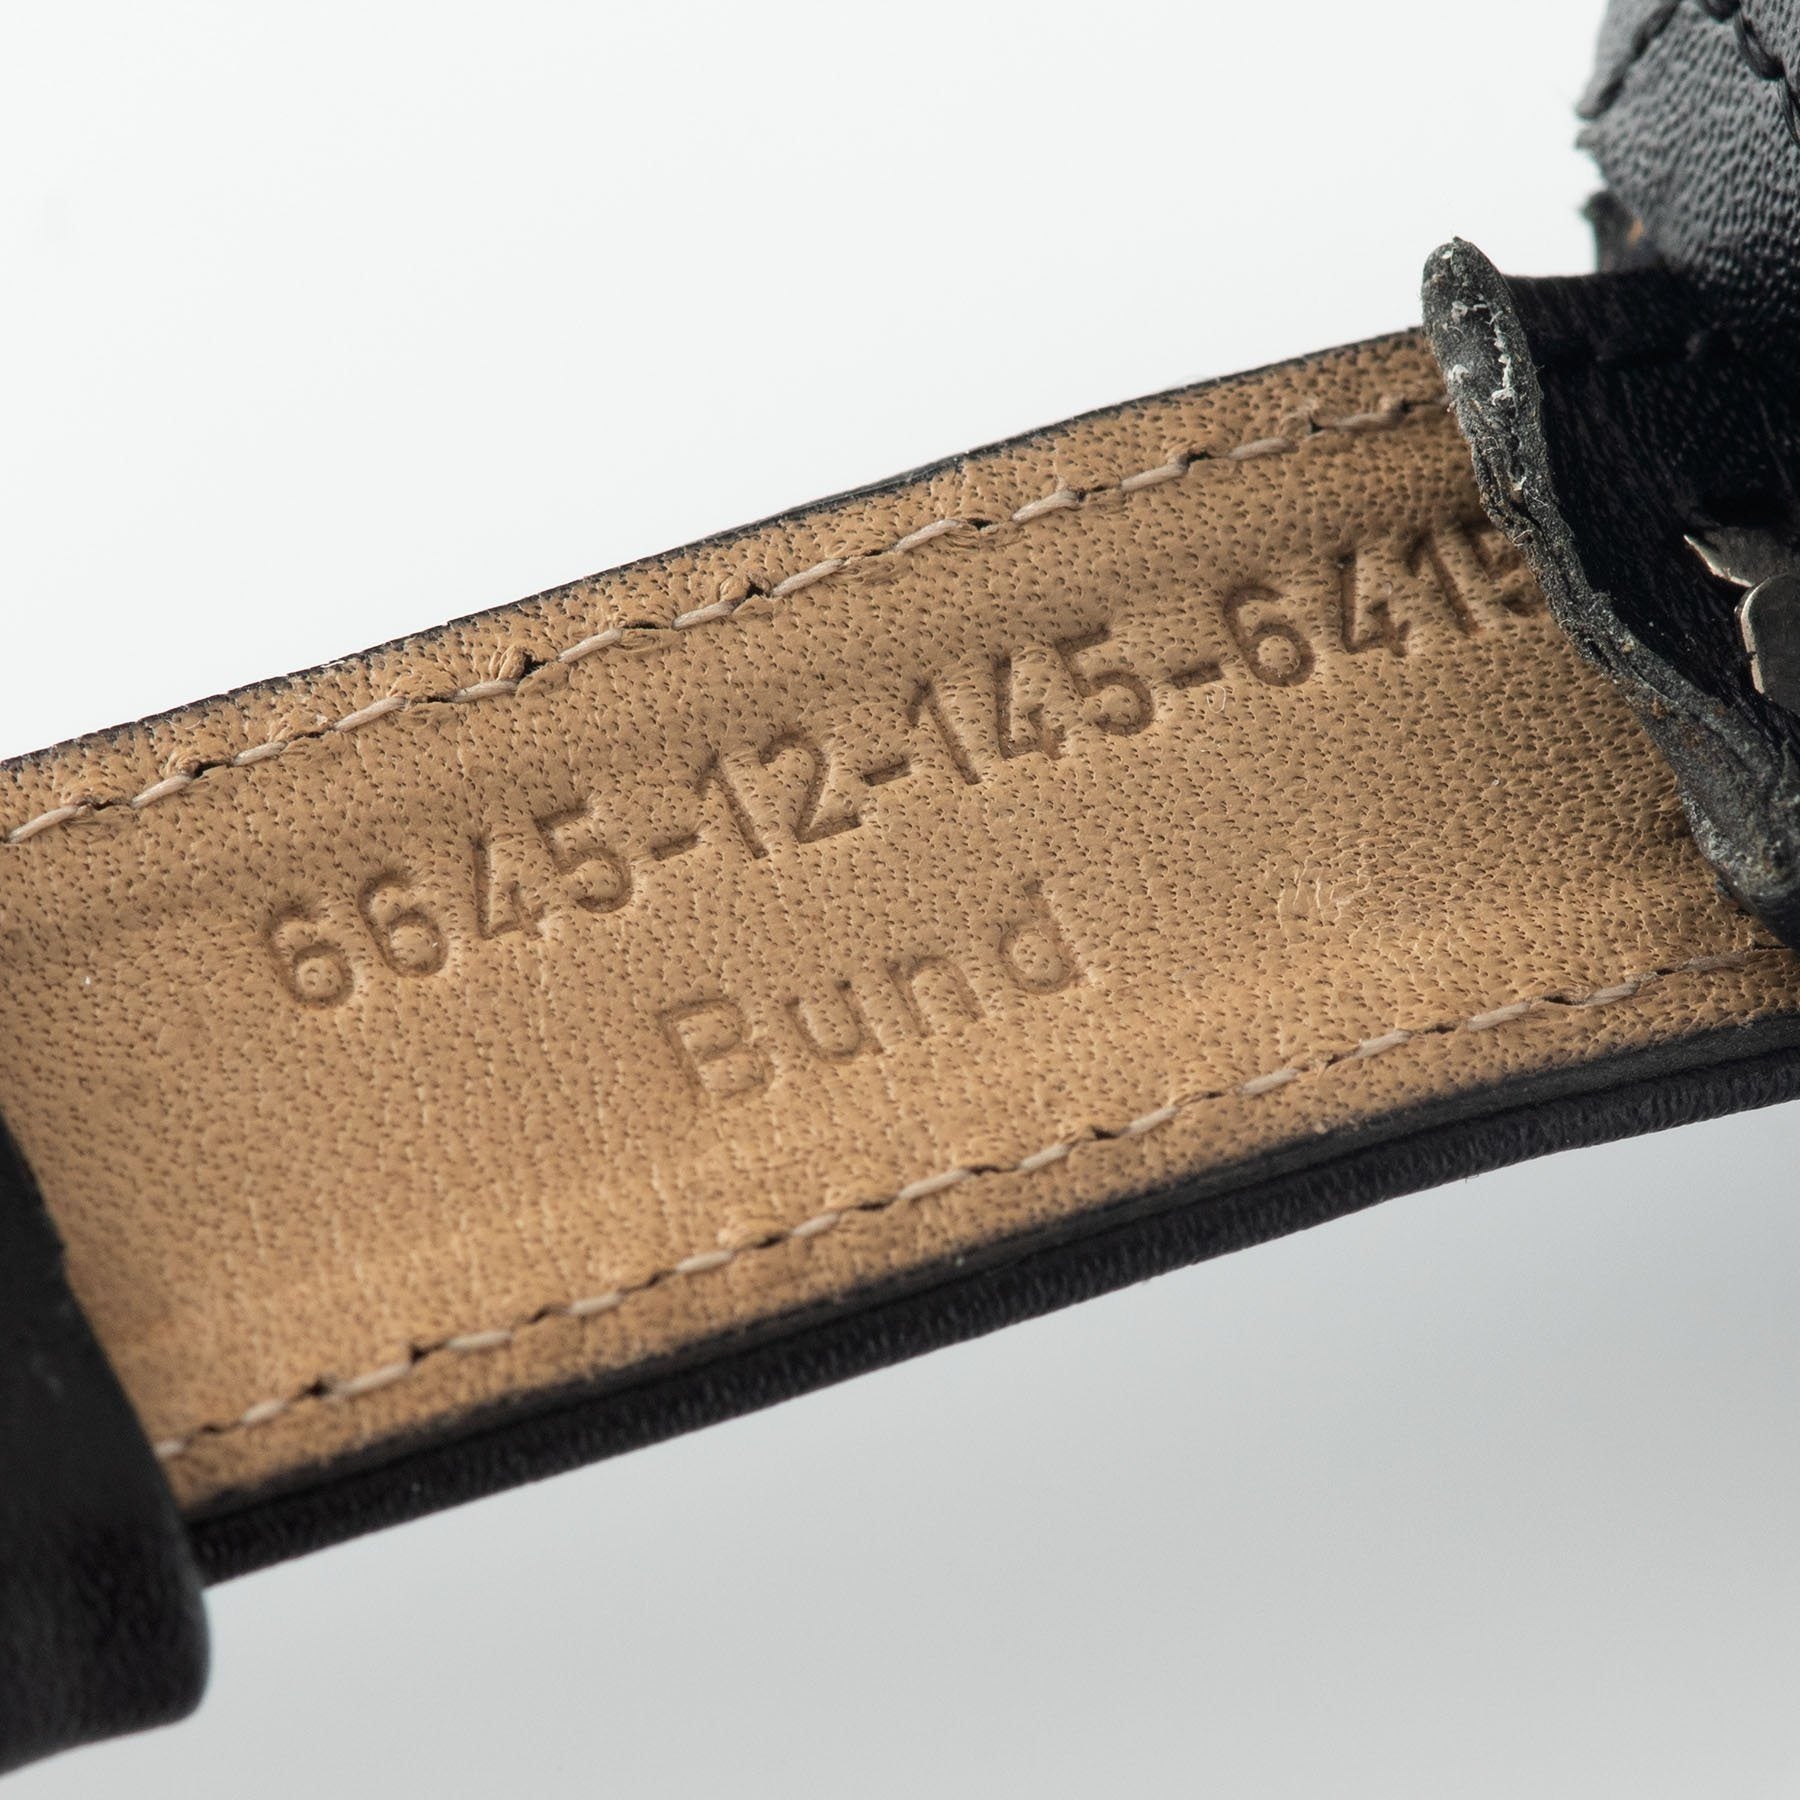 Junghans Chronograph Bundeswehr Issued Type 111